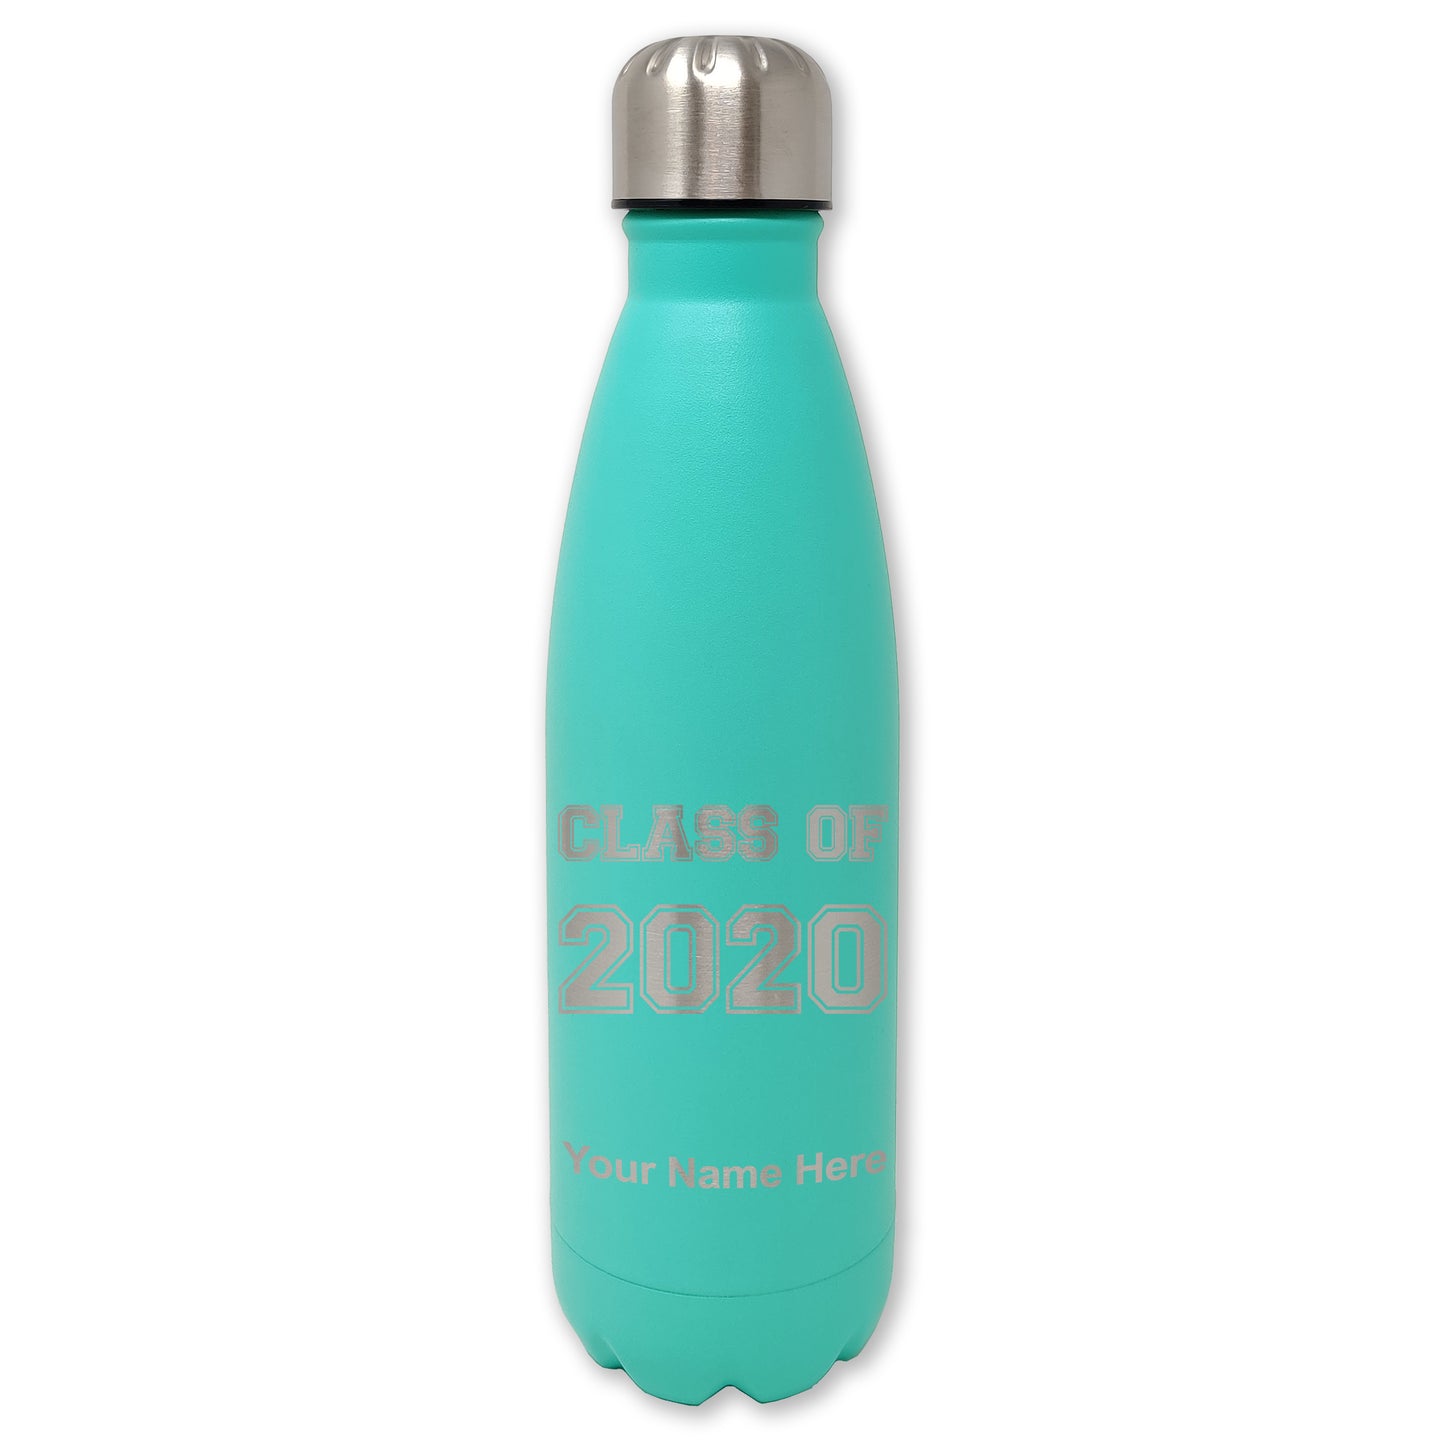 LaserGram Double Wall Water Bottle, Class of 2020, 2021, 2022, 2023, 2024, 2025, Personalized Engraving Included